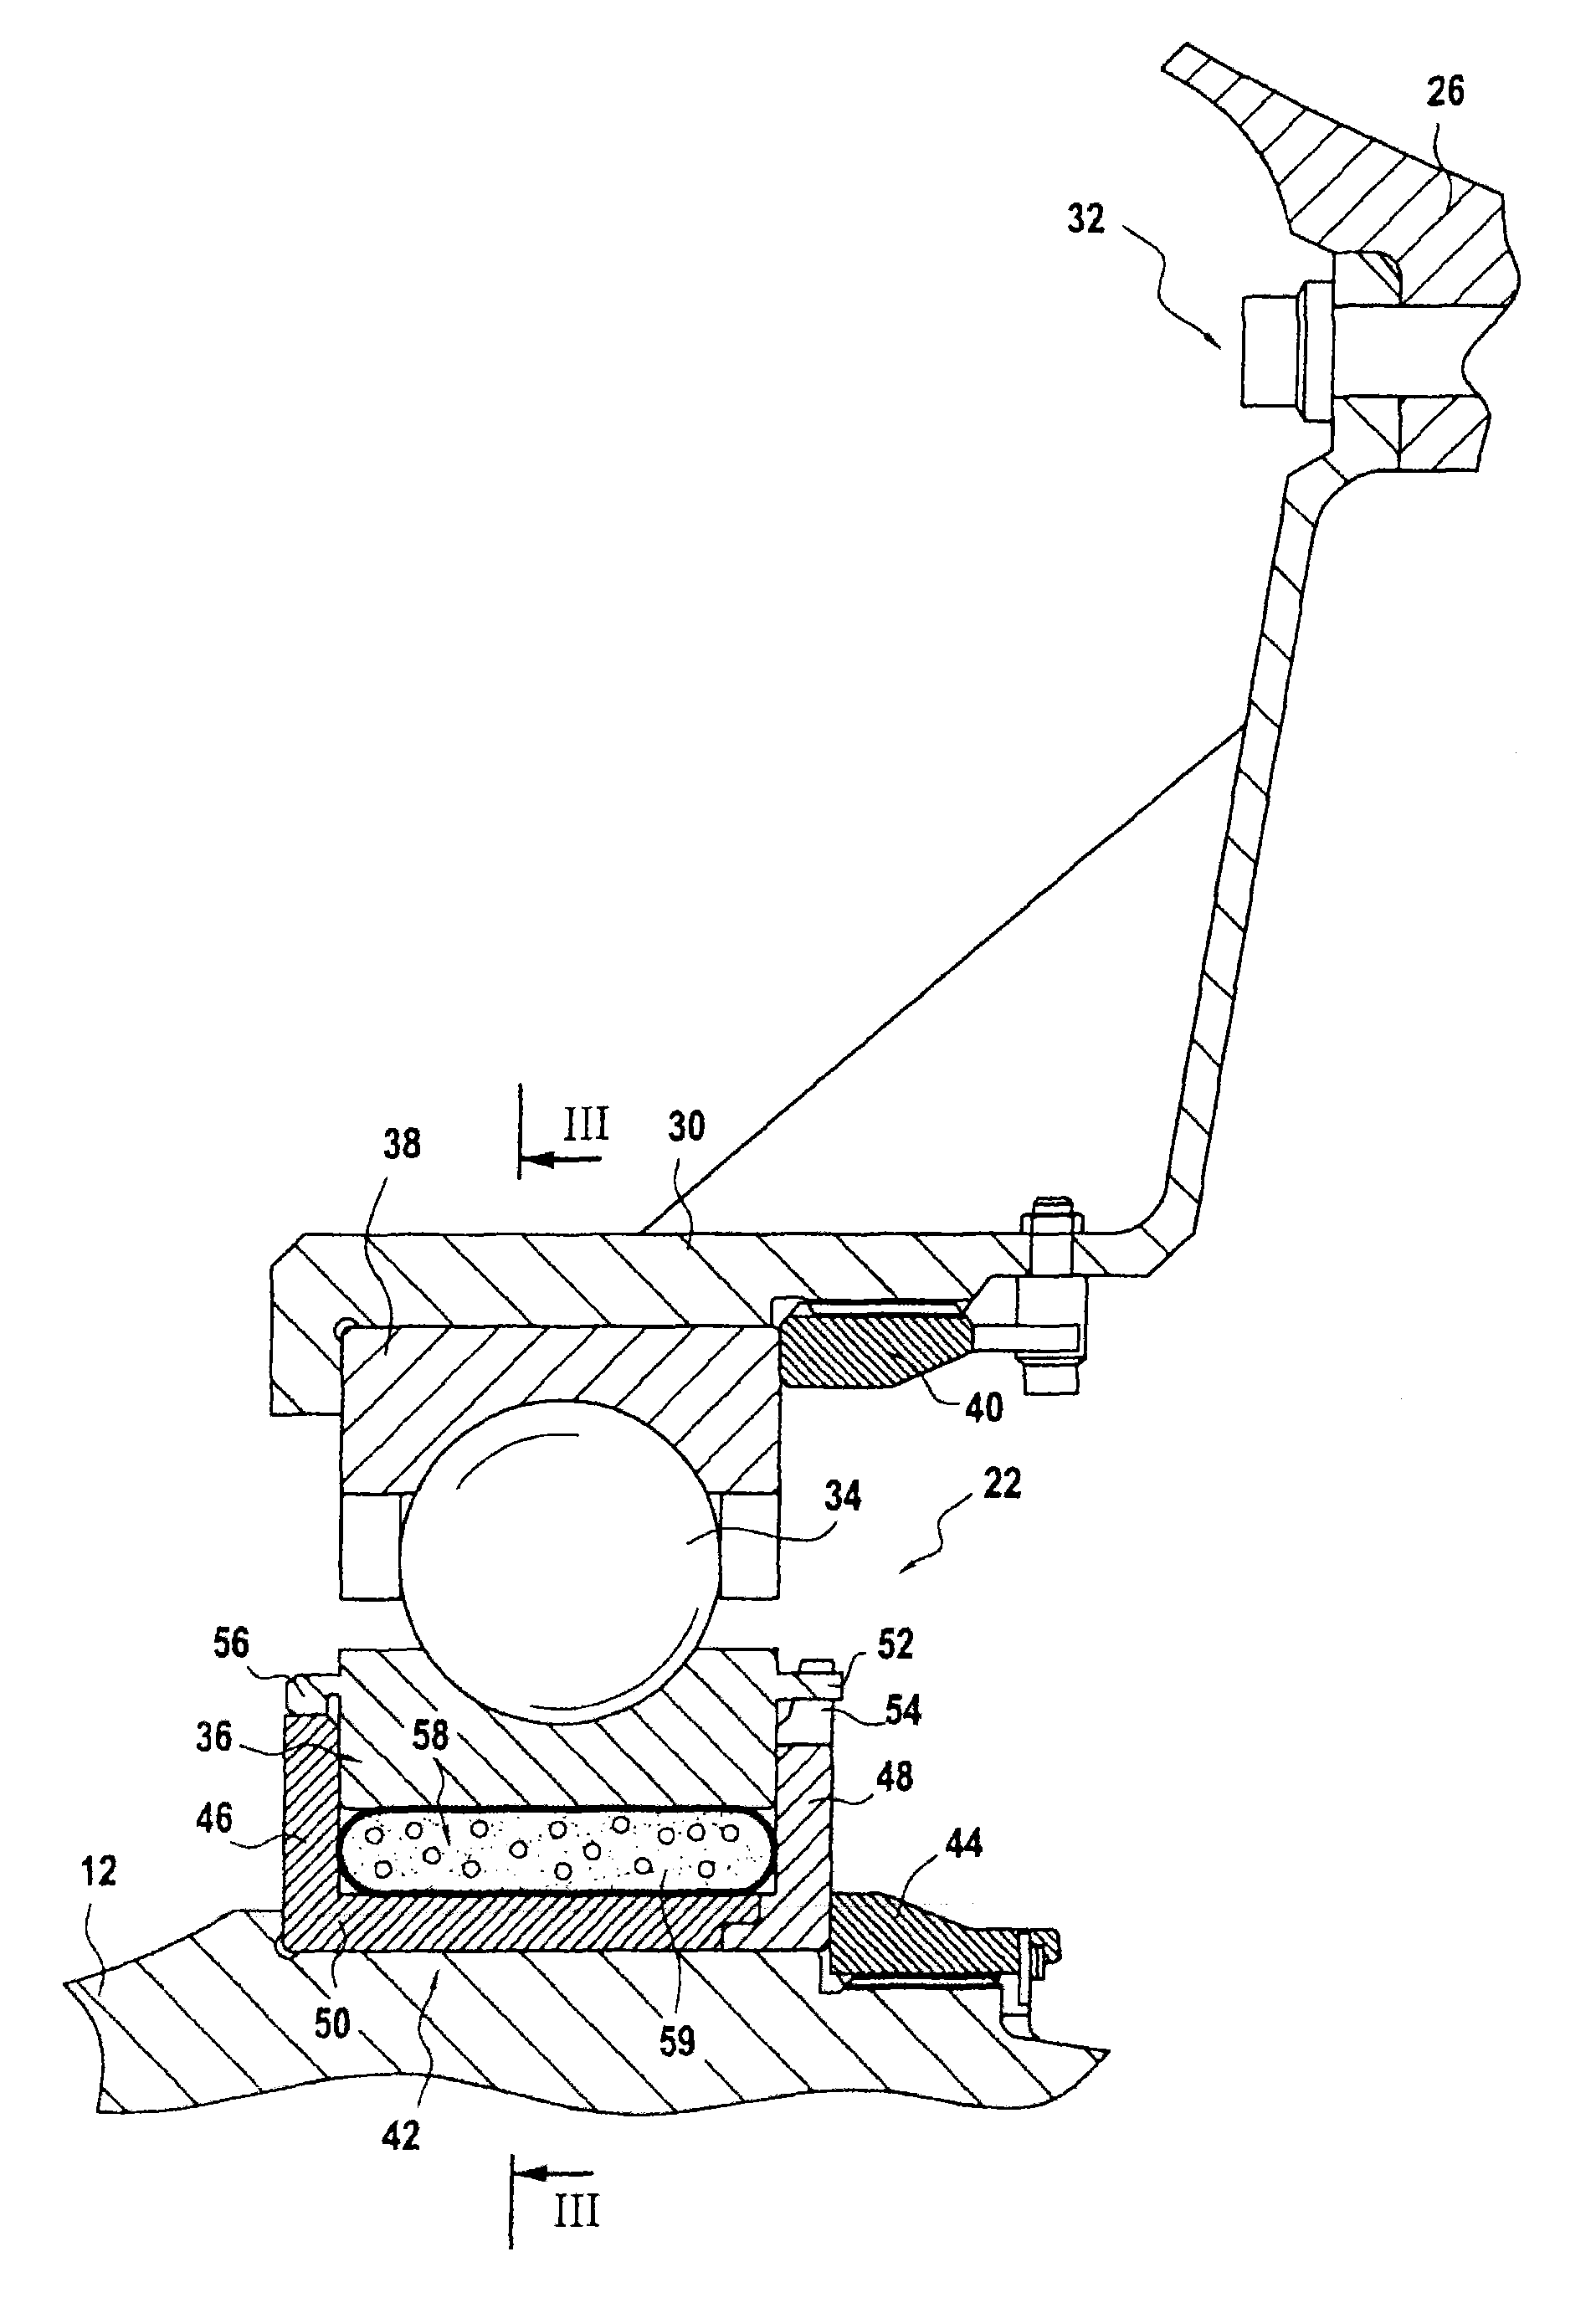 Uncoupling system for an aircraft turbojet engine rotary shaft